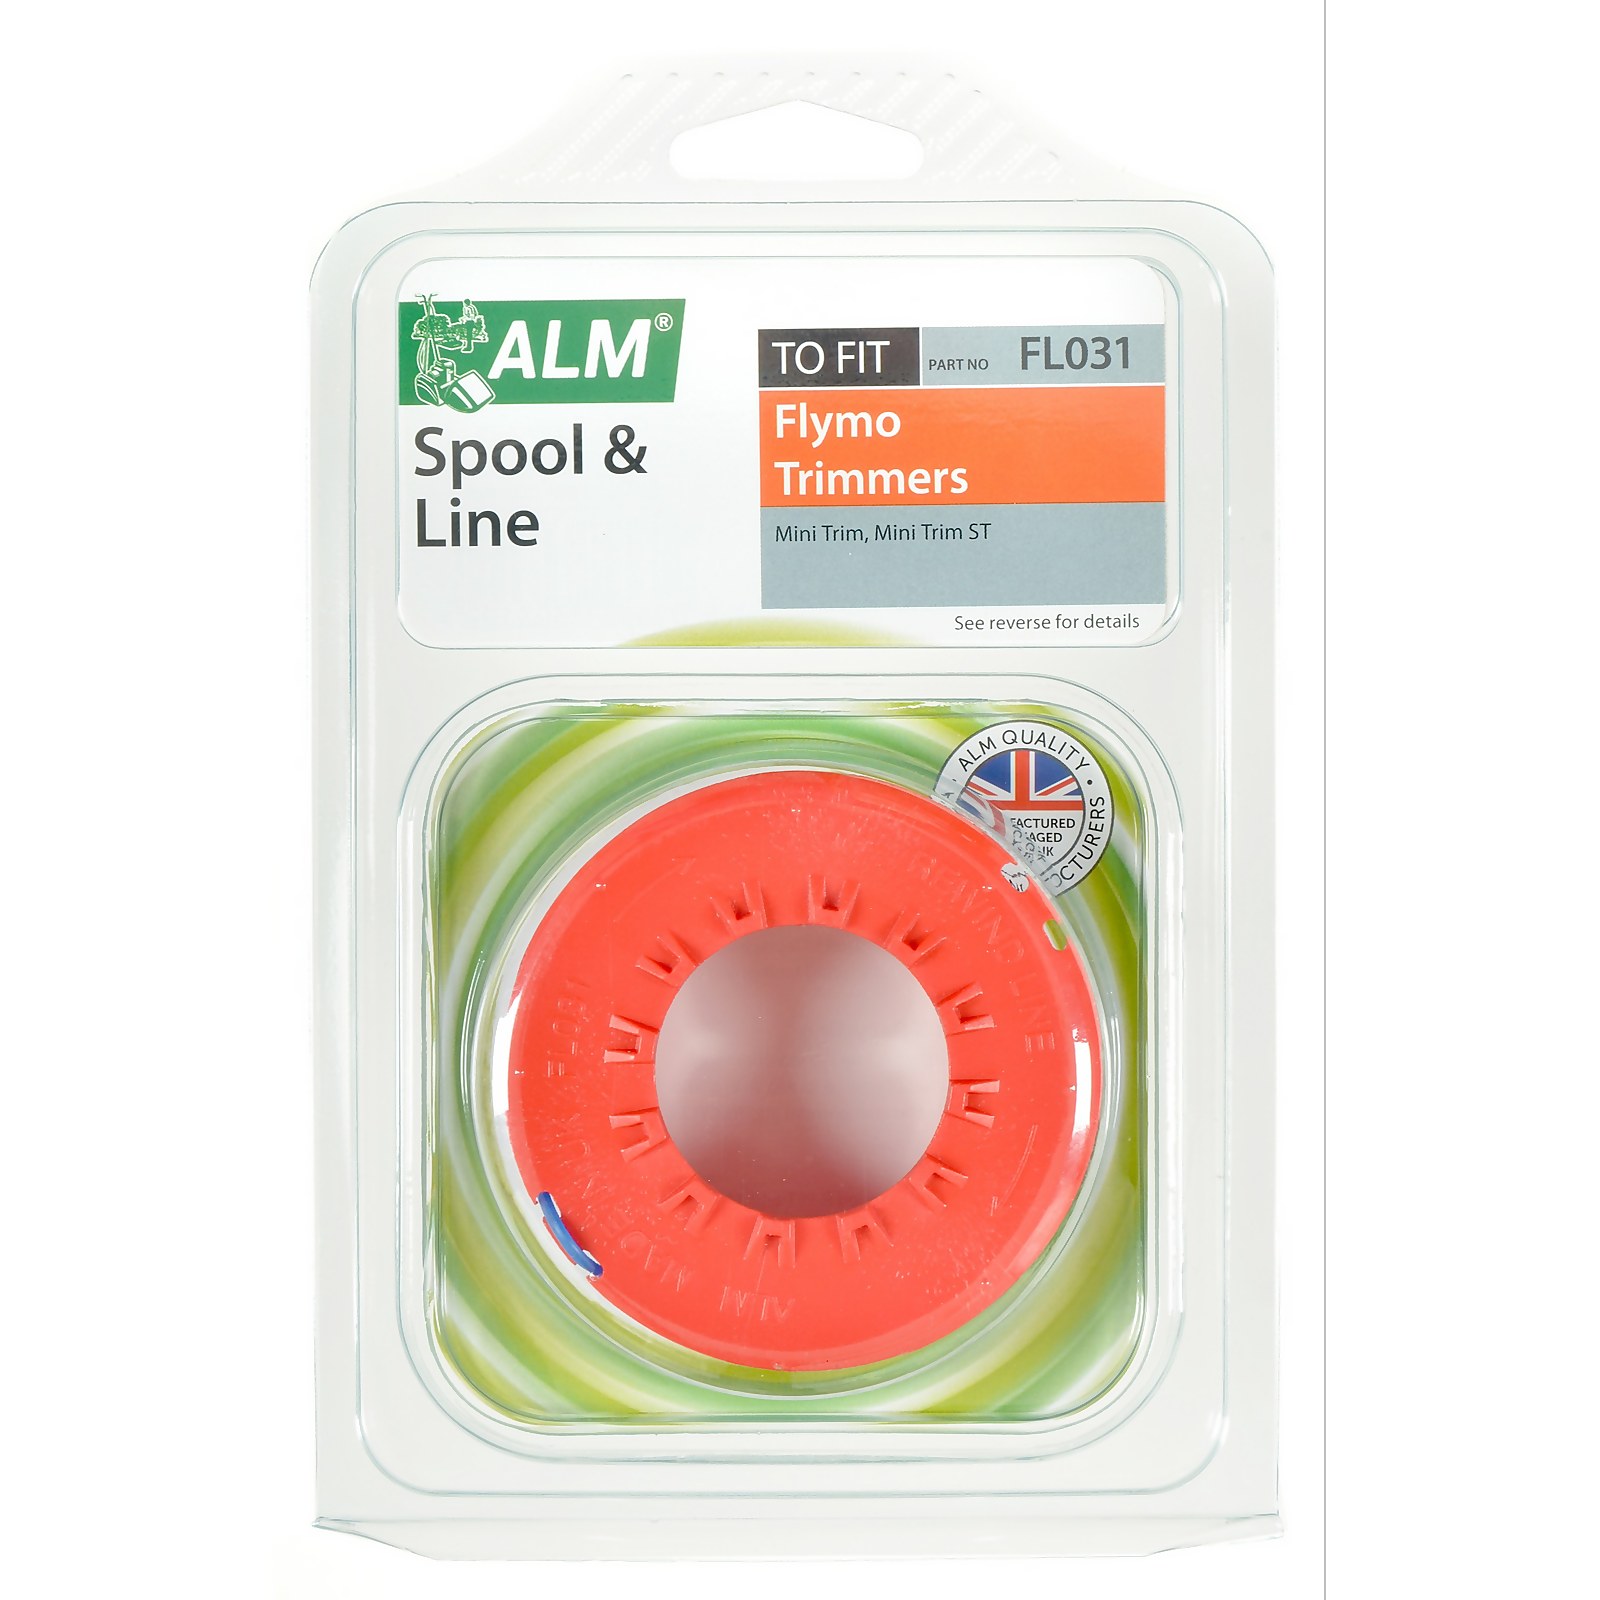 Photo of Alm Grass Trimmer Spool & Line For Flymo Mini Trim St